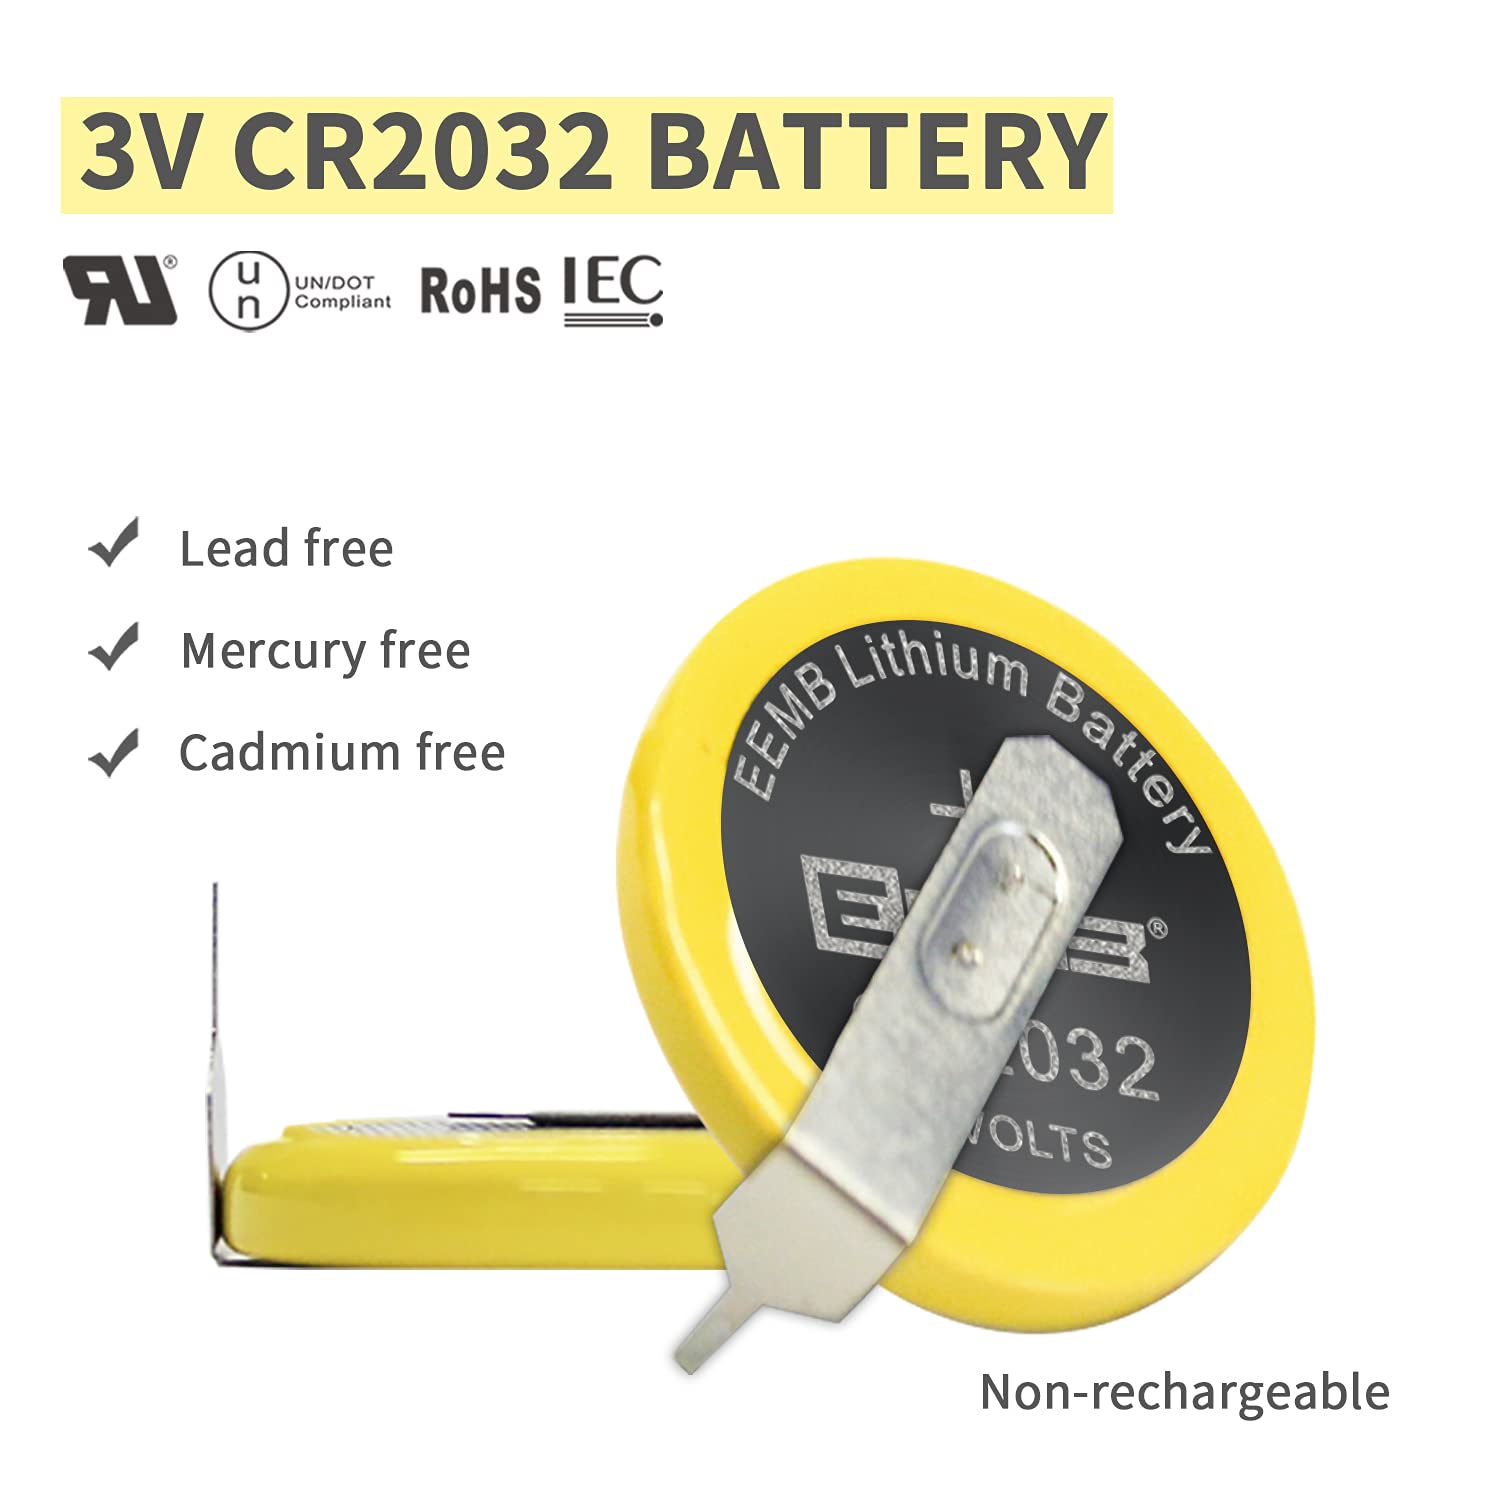 10X EEMB CR2032 Battery with Solder Tabs Non-Rechargeable Tabbed 3V CR2032 Lithium Batteries UL Certified (10 Count, CR2032-VBY2)